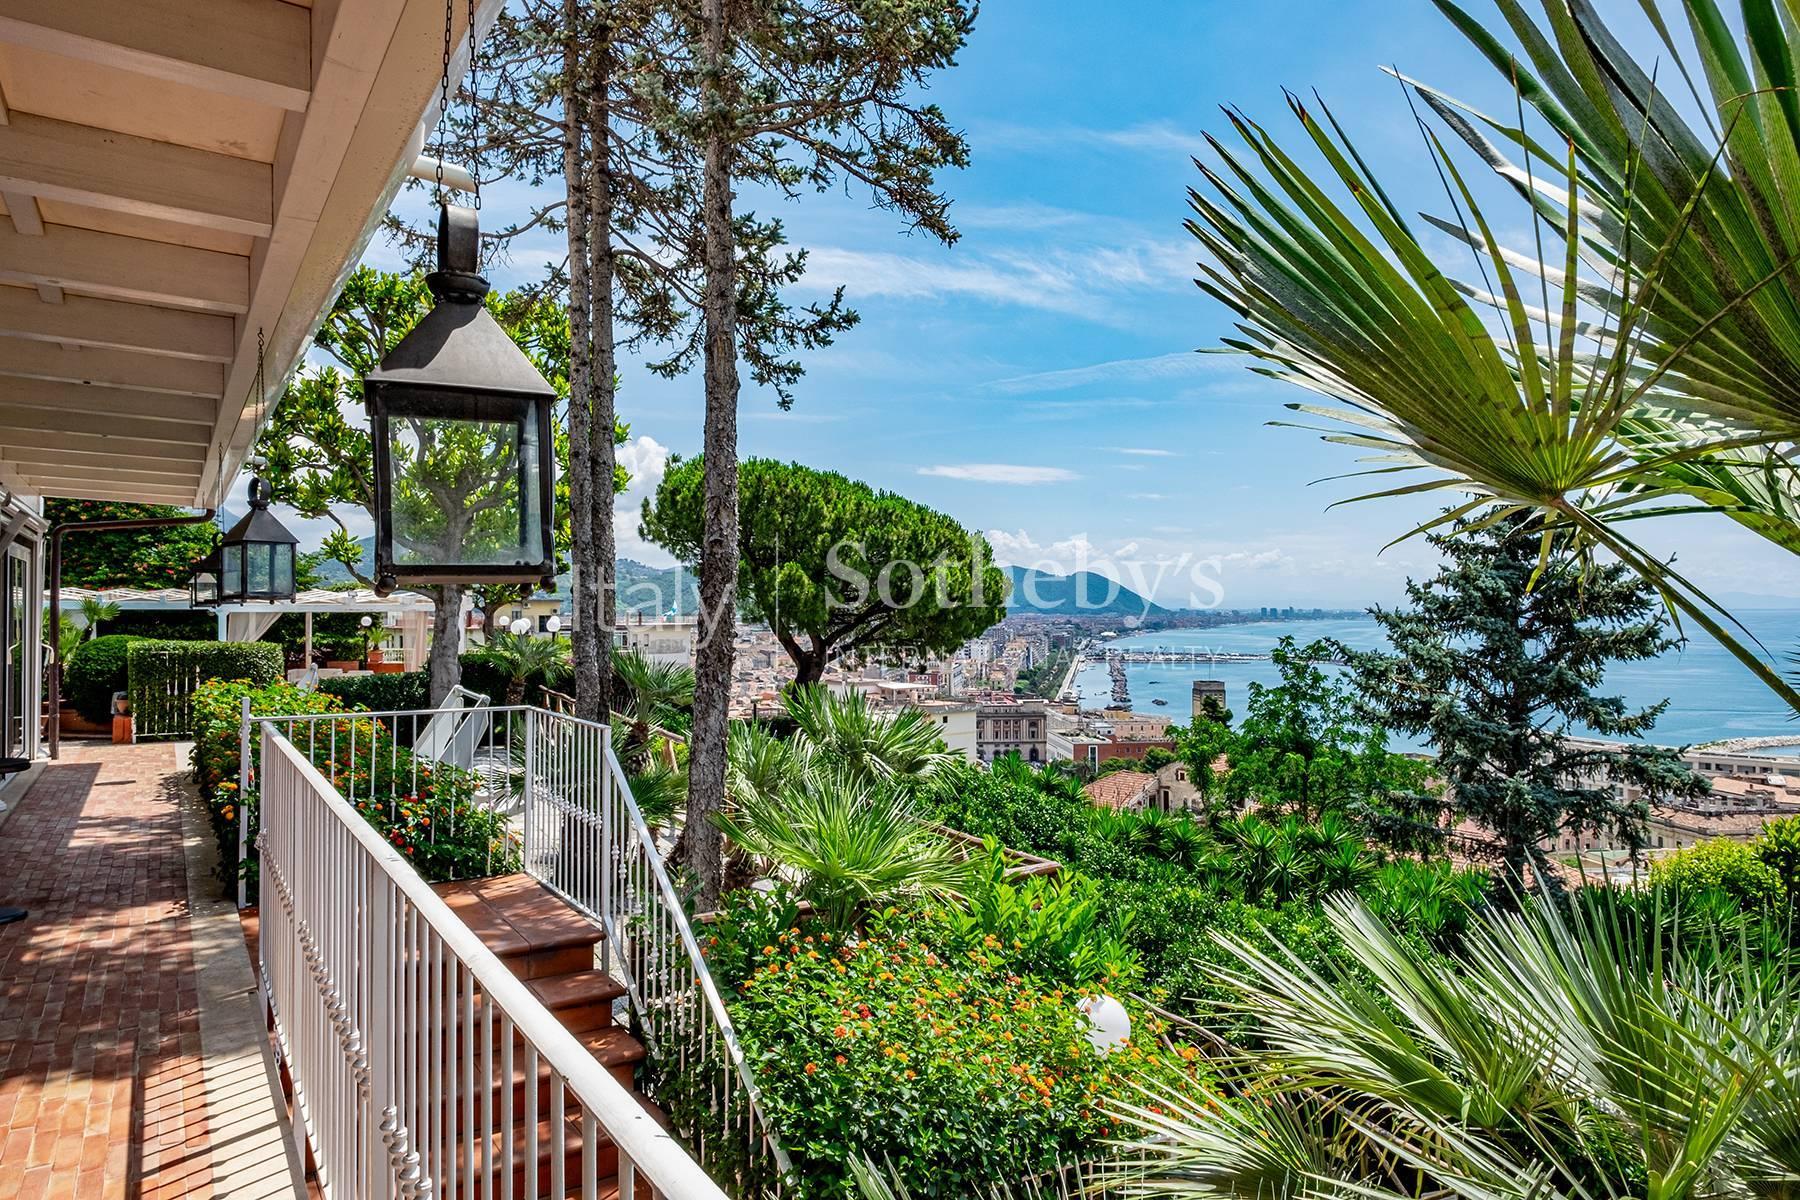 Exclusive villa with panoramic terraces and gardens close to Salerno and Vietri sul Mare - 11